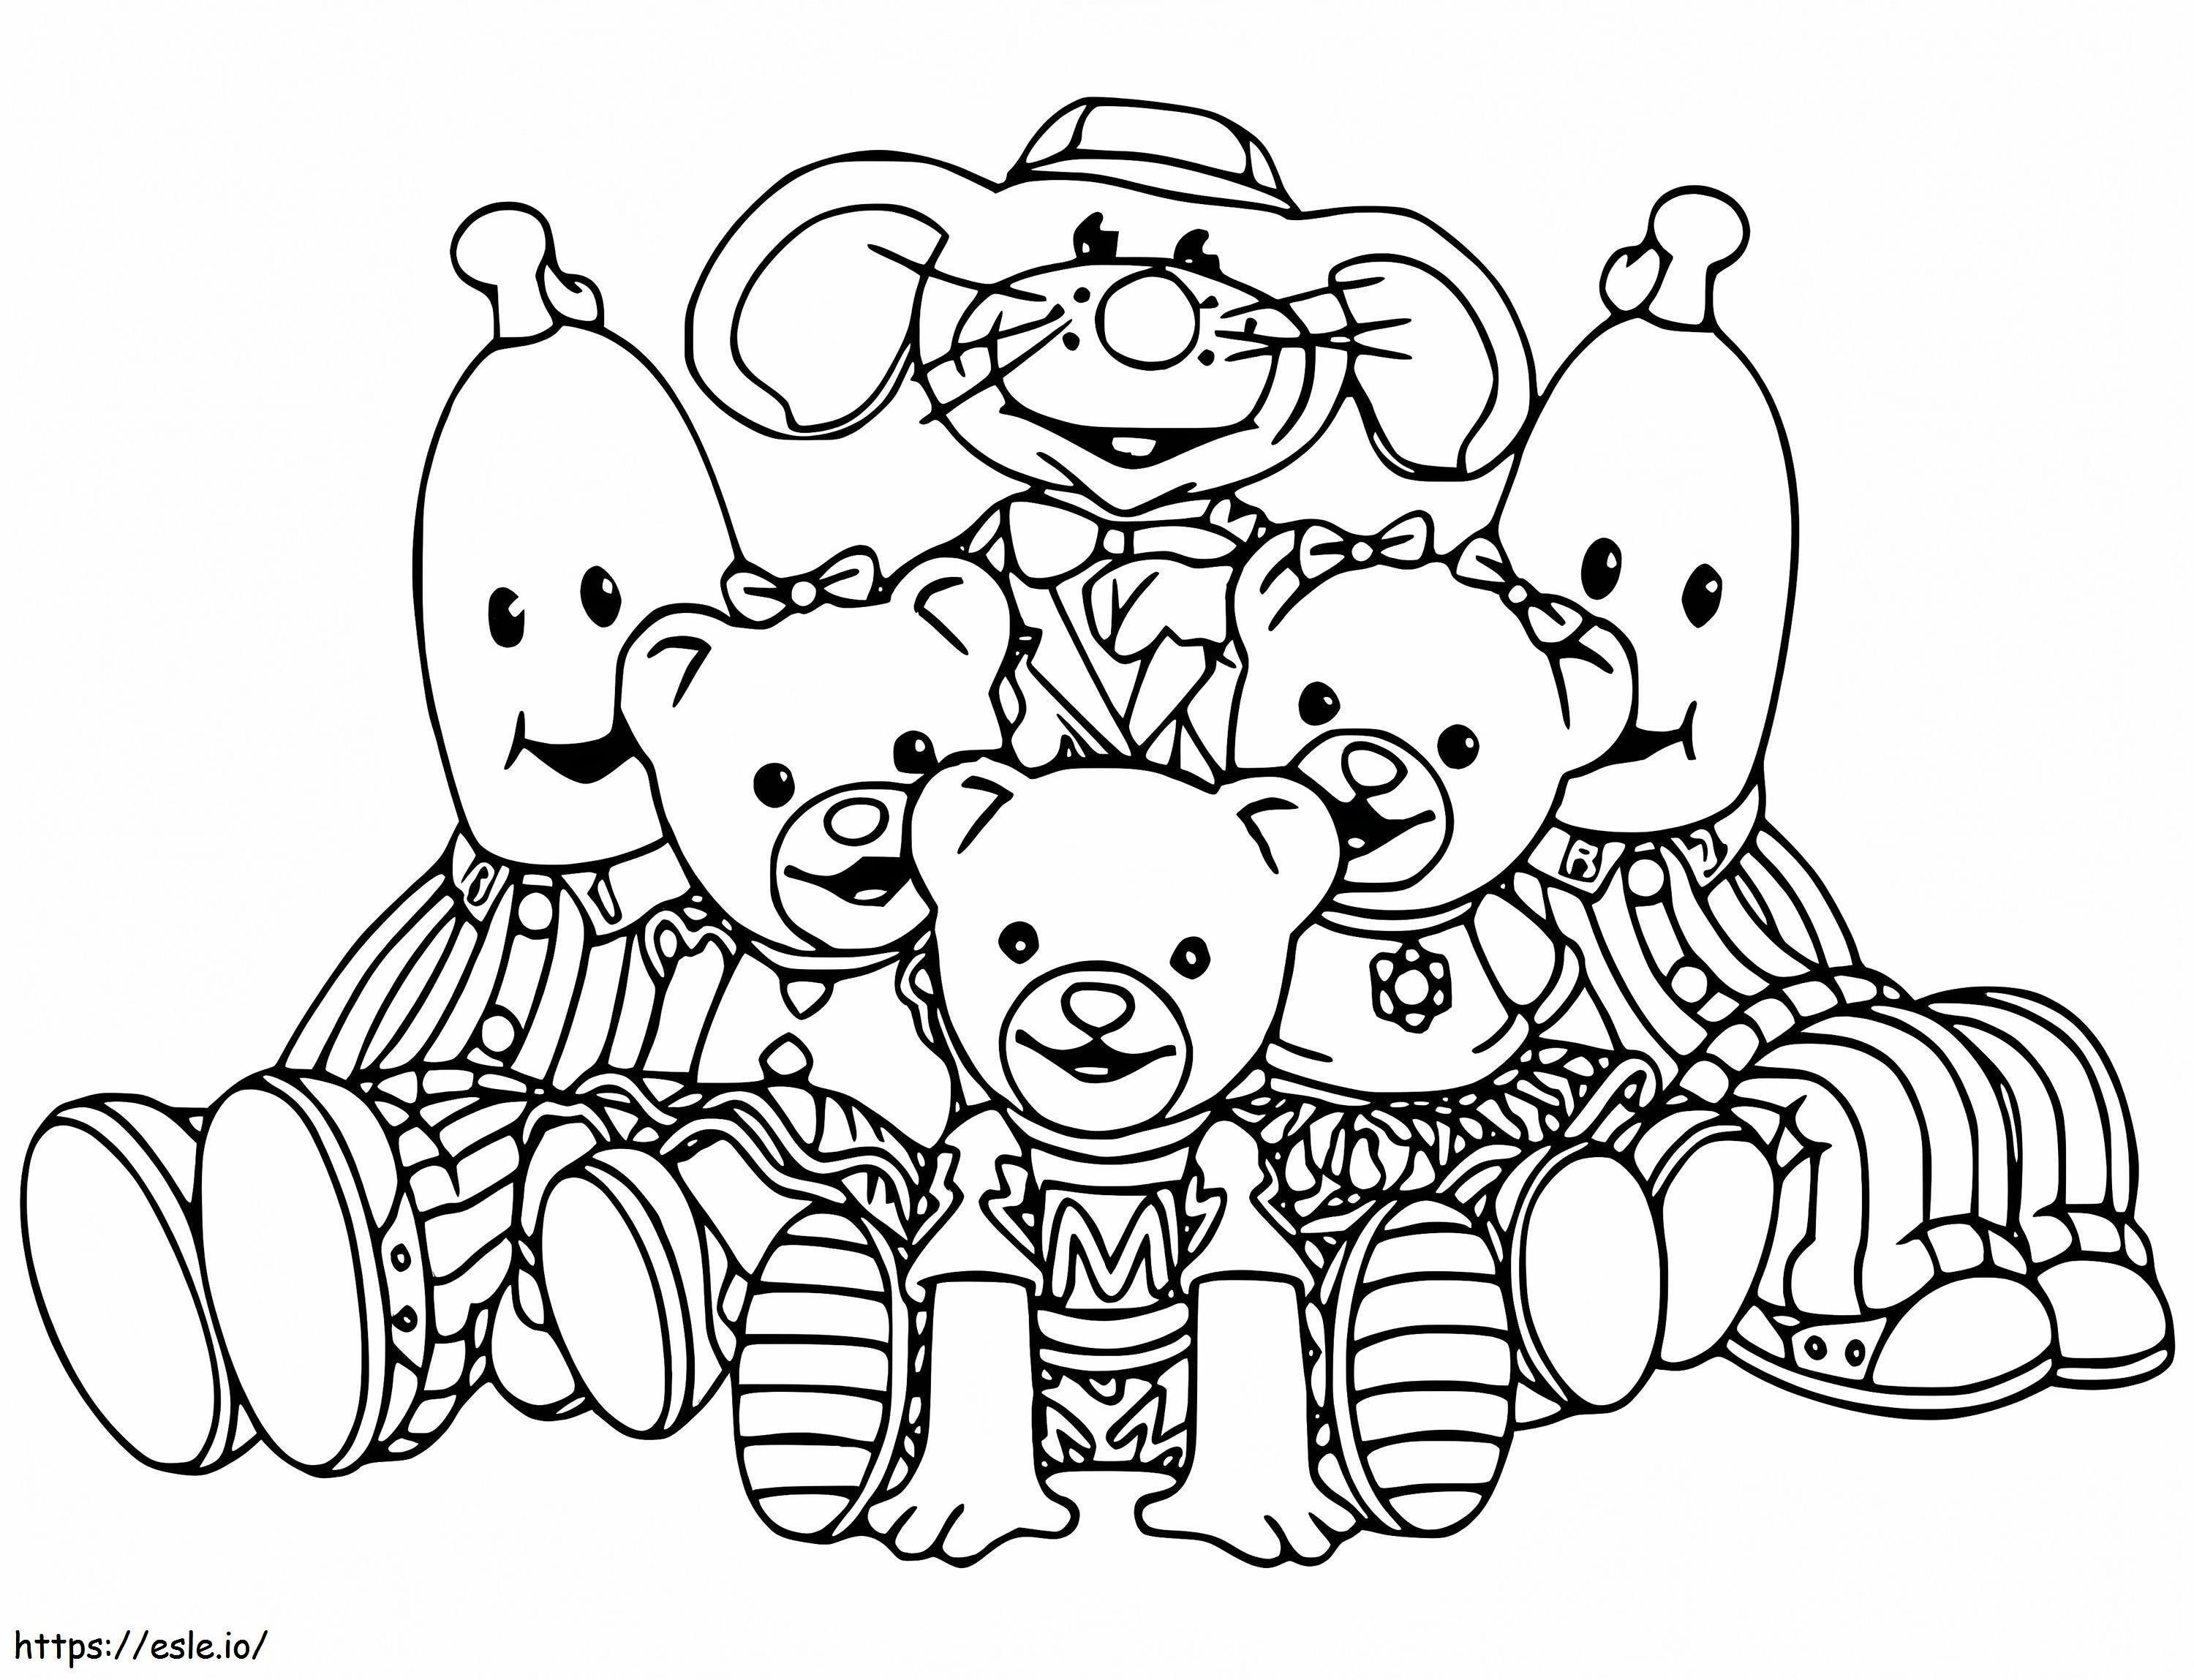 Bananas In Pyjamas And Friends coloring page